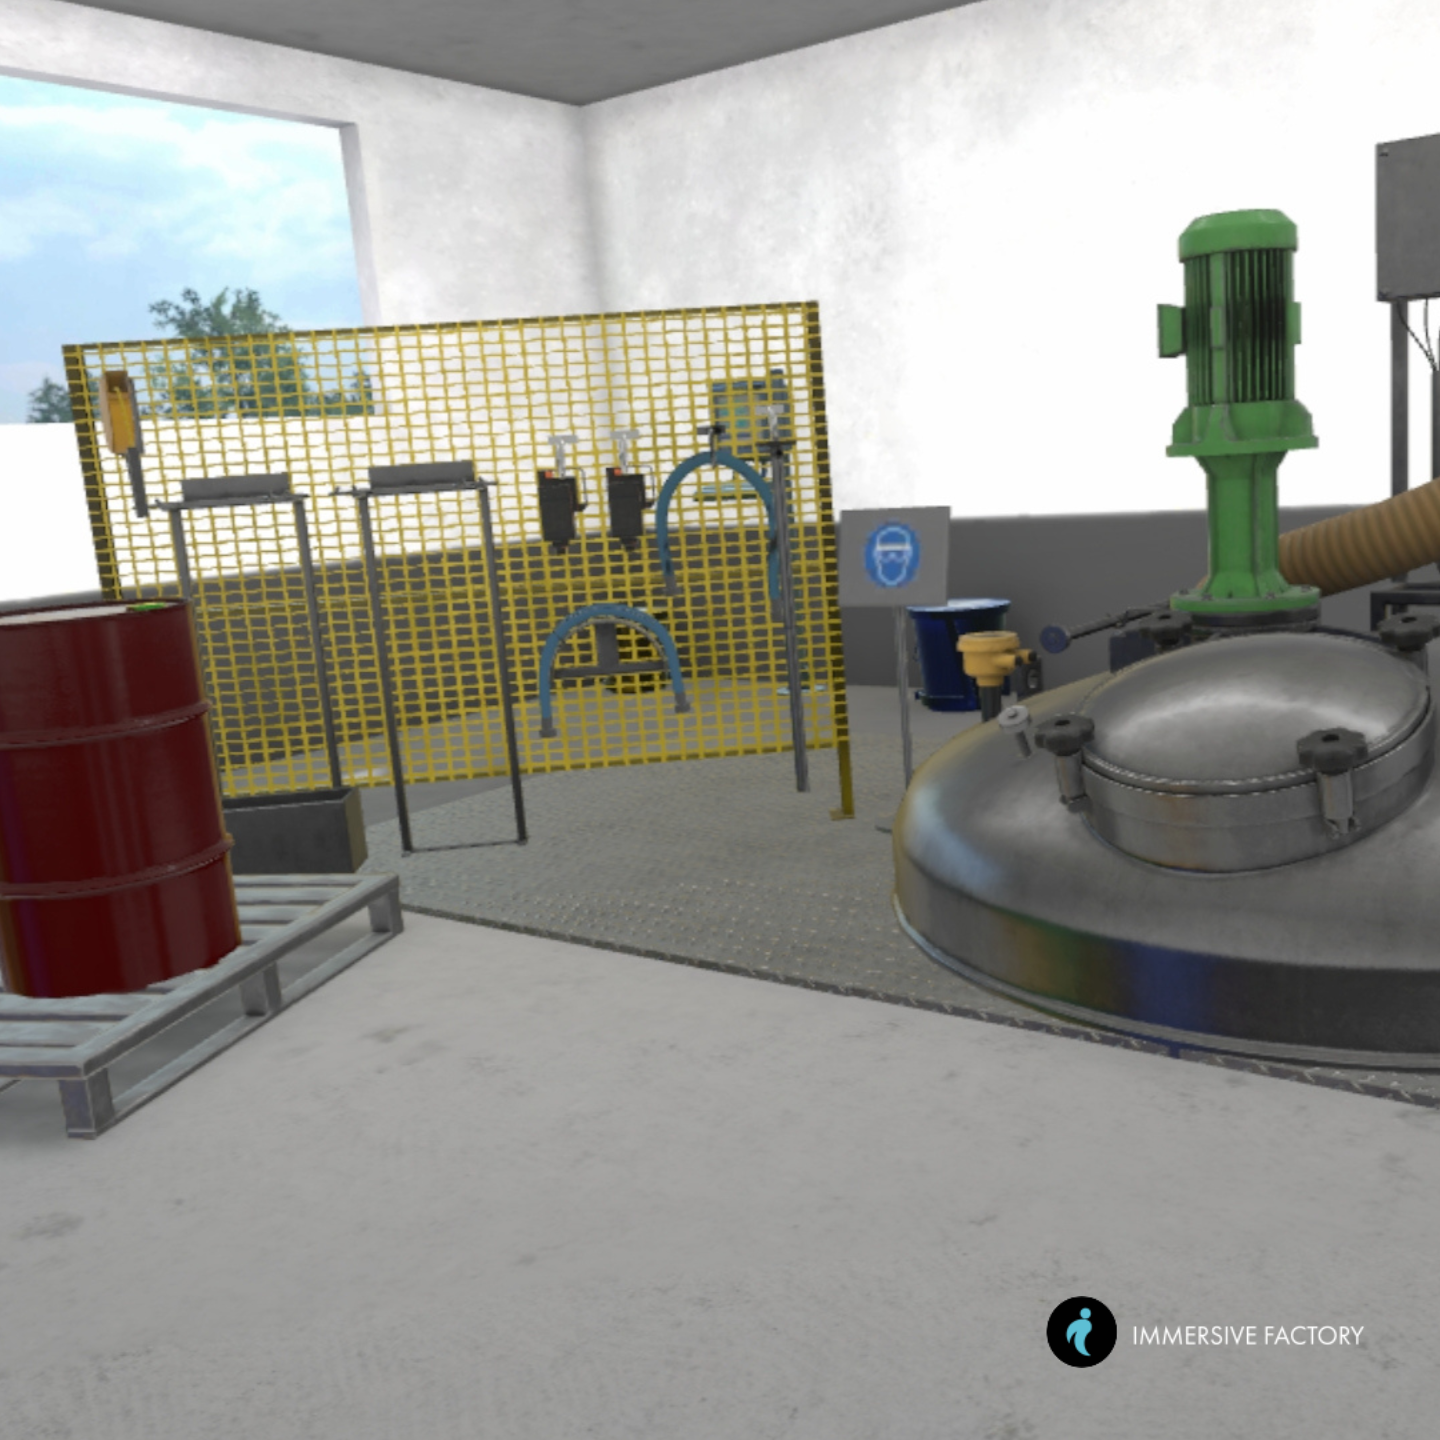 Immersive Factory _ Exercices risques ambiances thermiques VR Risques ambiances thermiques